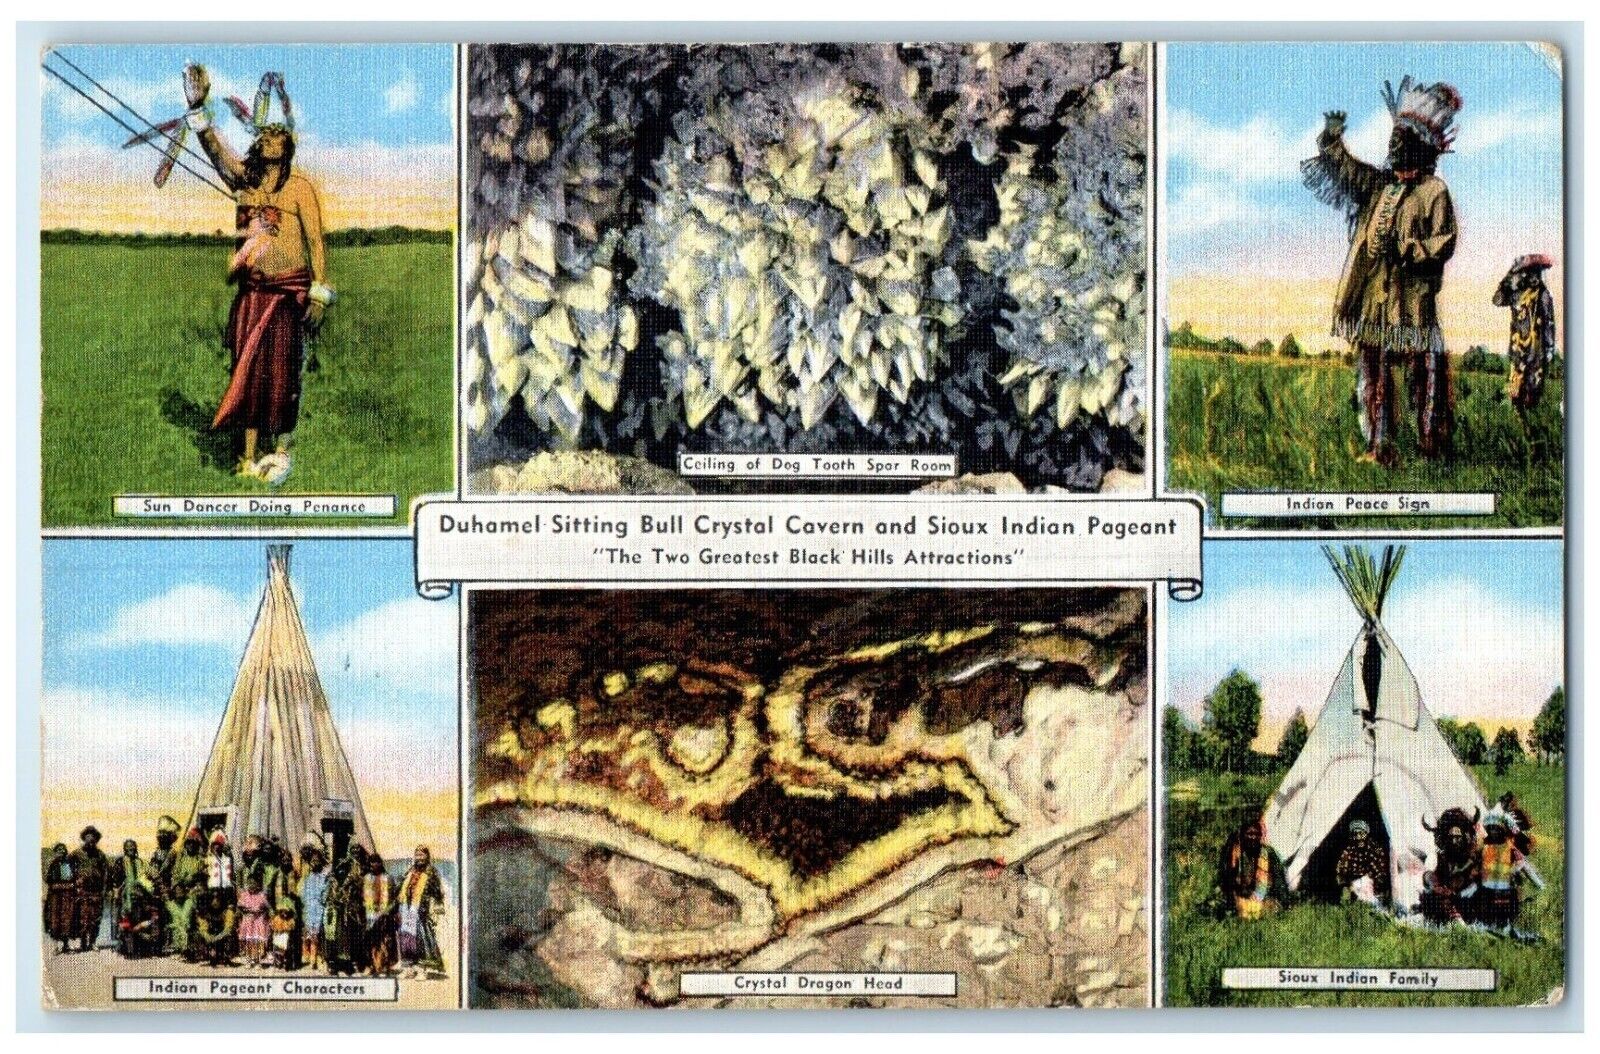 1940 Duhamel Sitting Bull Crystal Cavern Sioux Indian Pageant Multiview Postcard